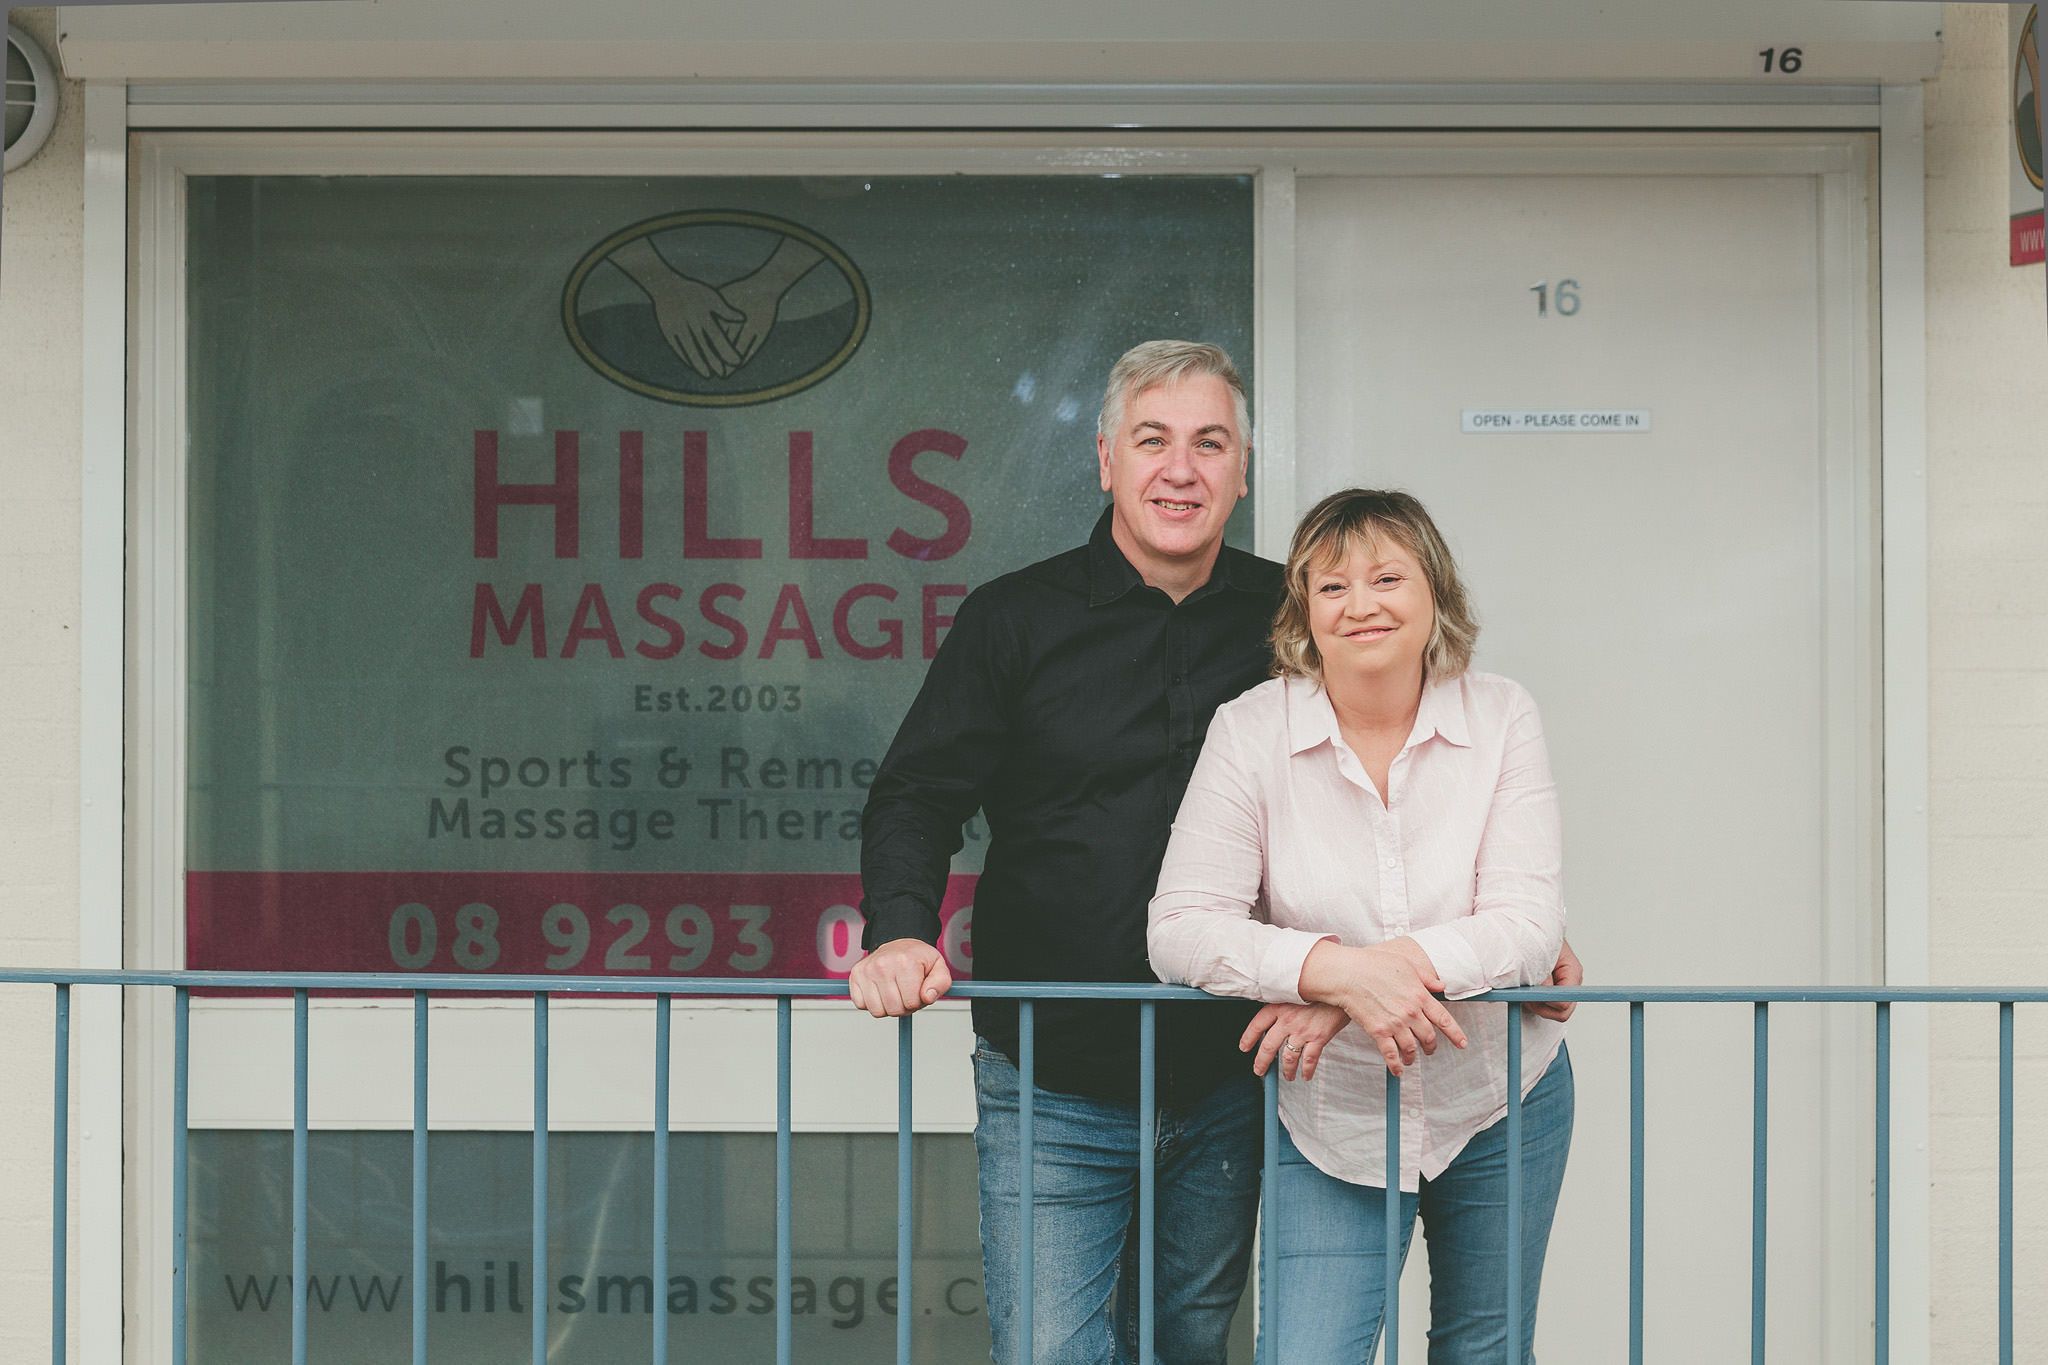 Hills massage practice owners, Michelle Rimmer and Alec Rimmer